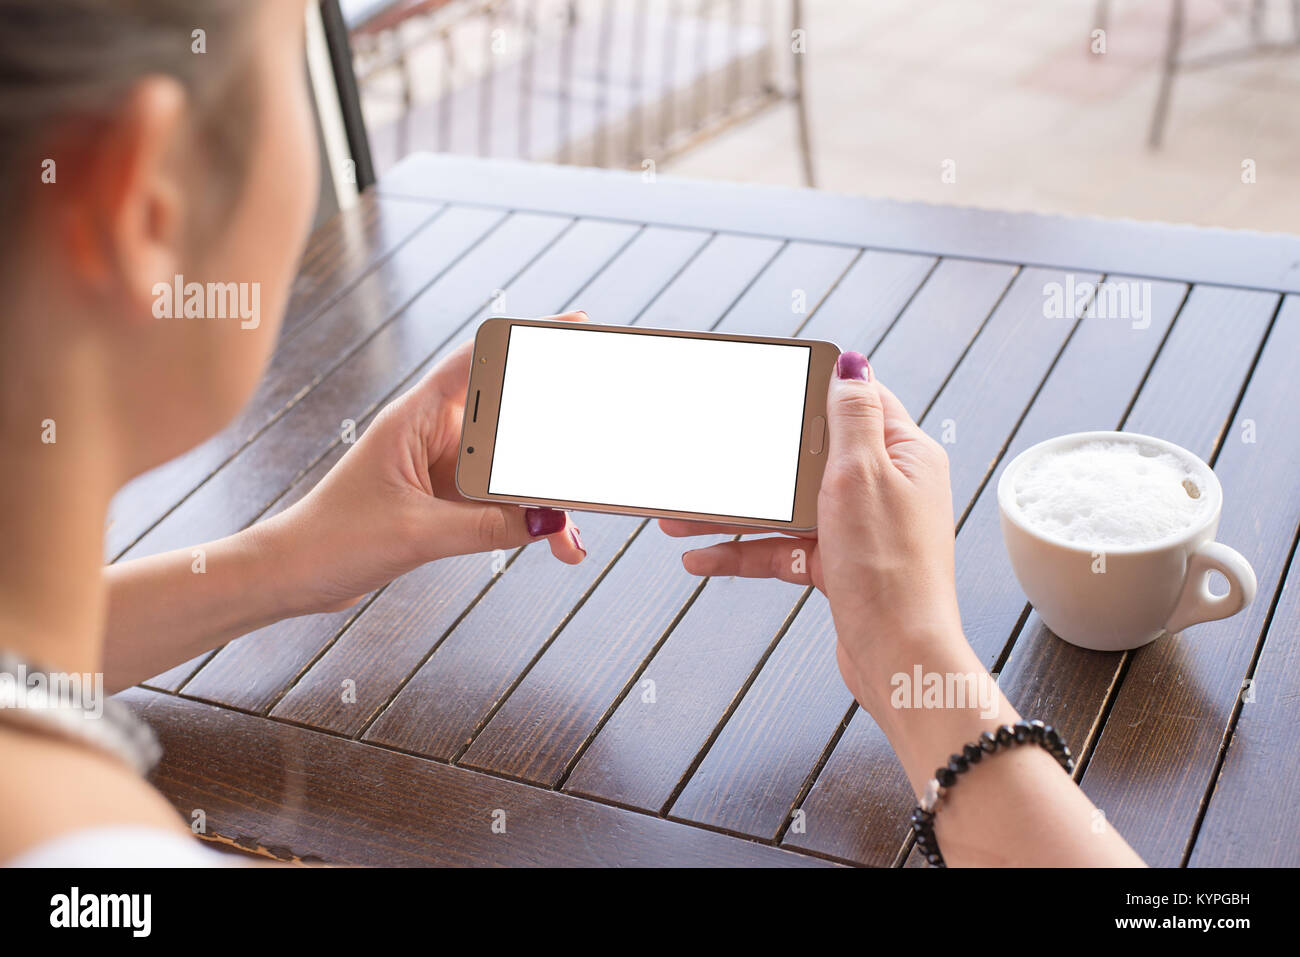 Woman holding mobile phone in horizontal position with isolated screen for mockup. Coffee cup and wooden desk in background. Stock Photo